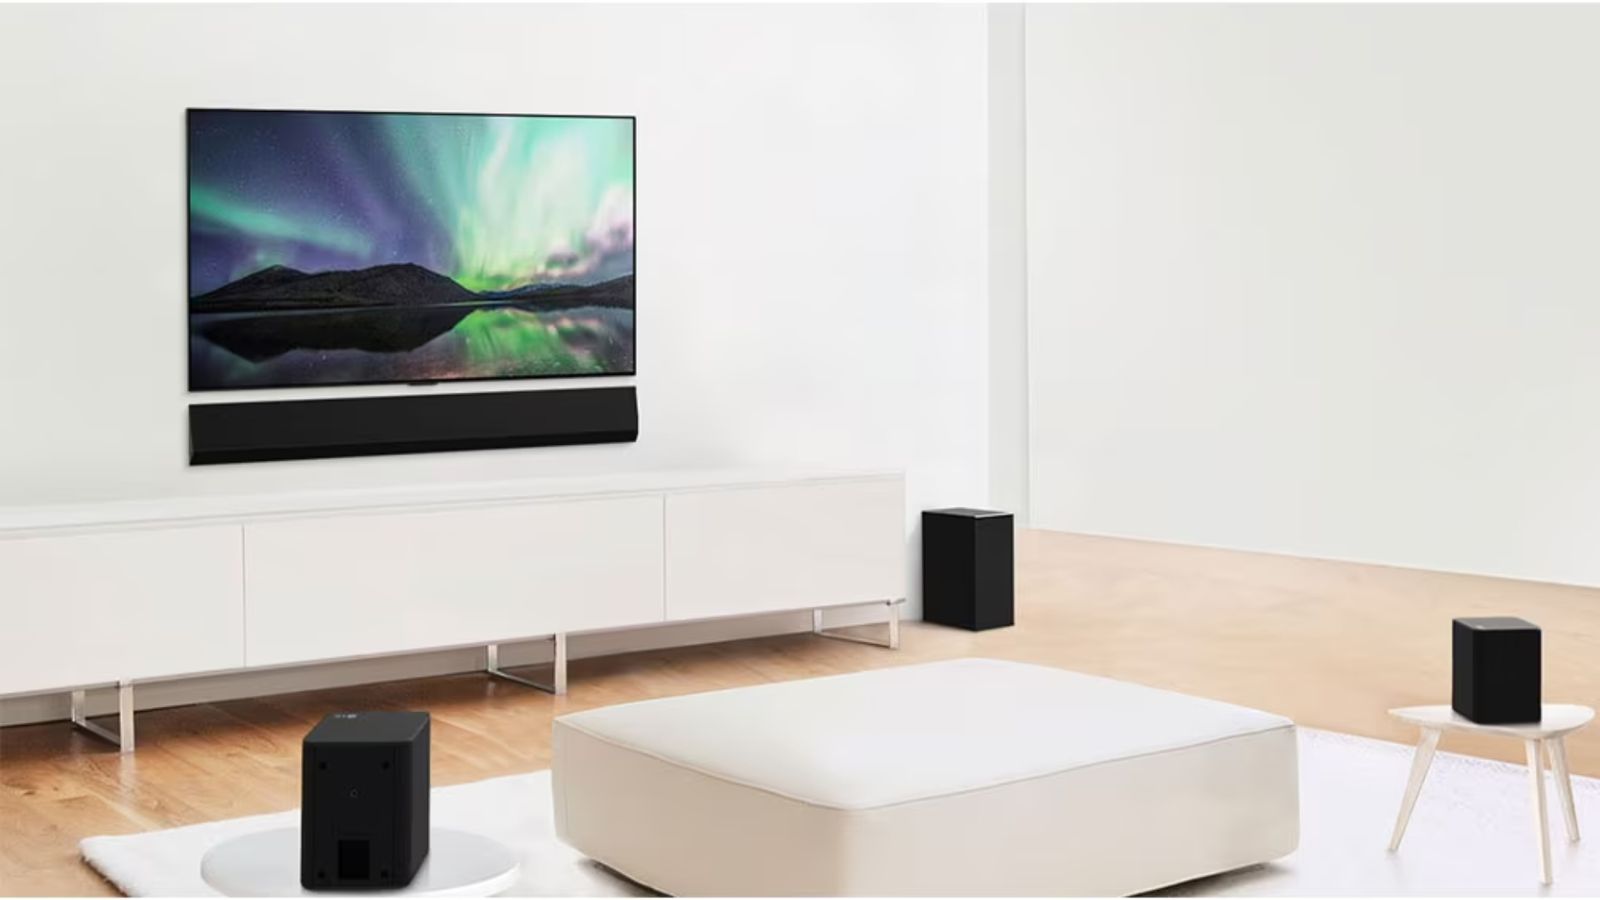 Image of a flatscreen TV featuring a North Lights screen in a living room filled with white furniture and black speakers.